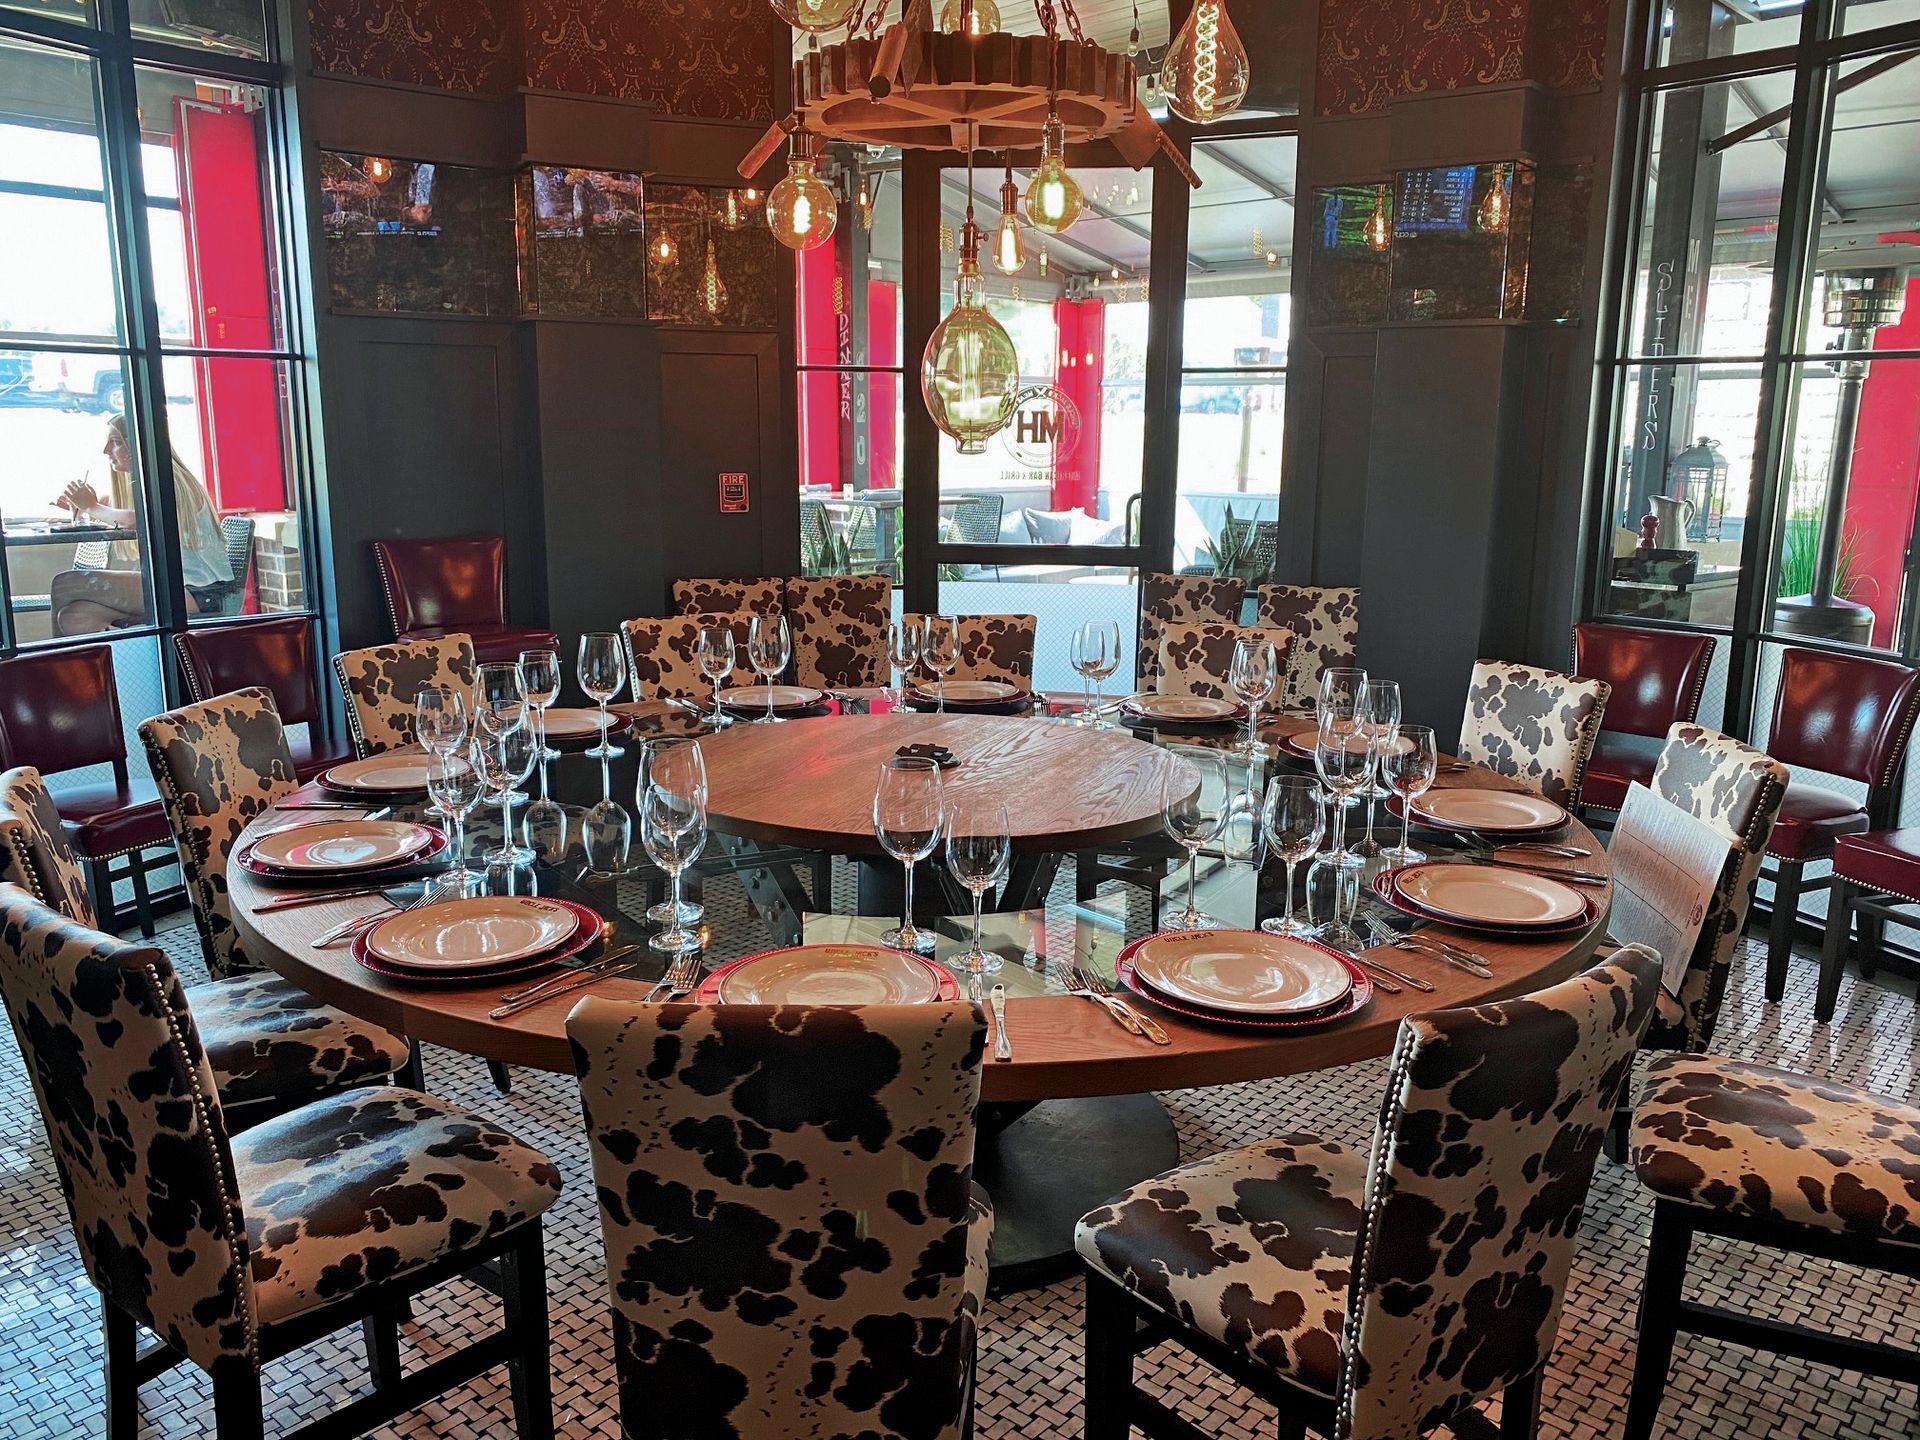 a dining room with a round table and cow print chairs, private dining at uncle jacks meathouse